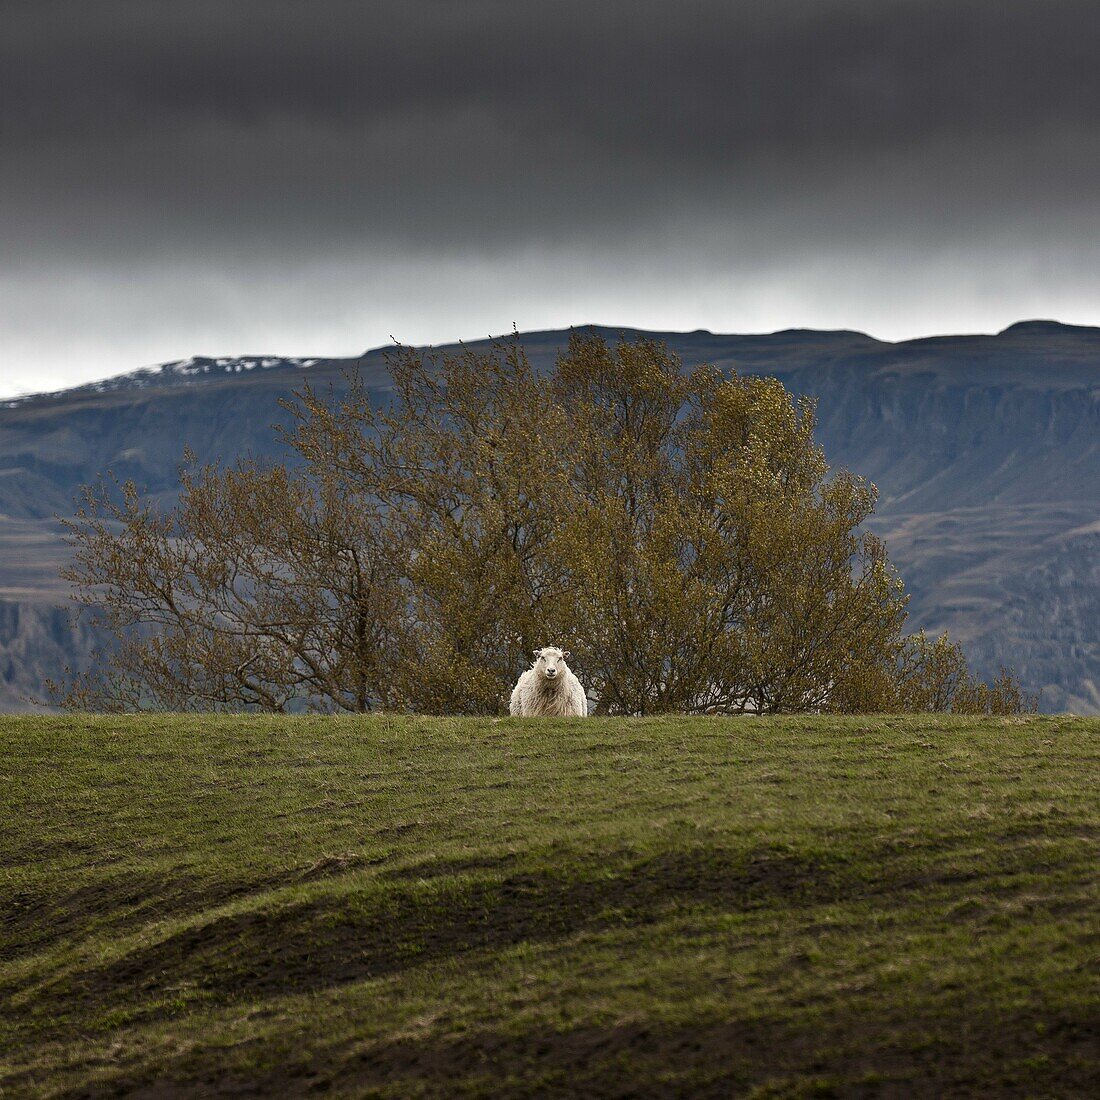 Lone sheep under tree  Some ash on the grass and hills from Grimsvotn volcanic eruption